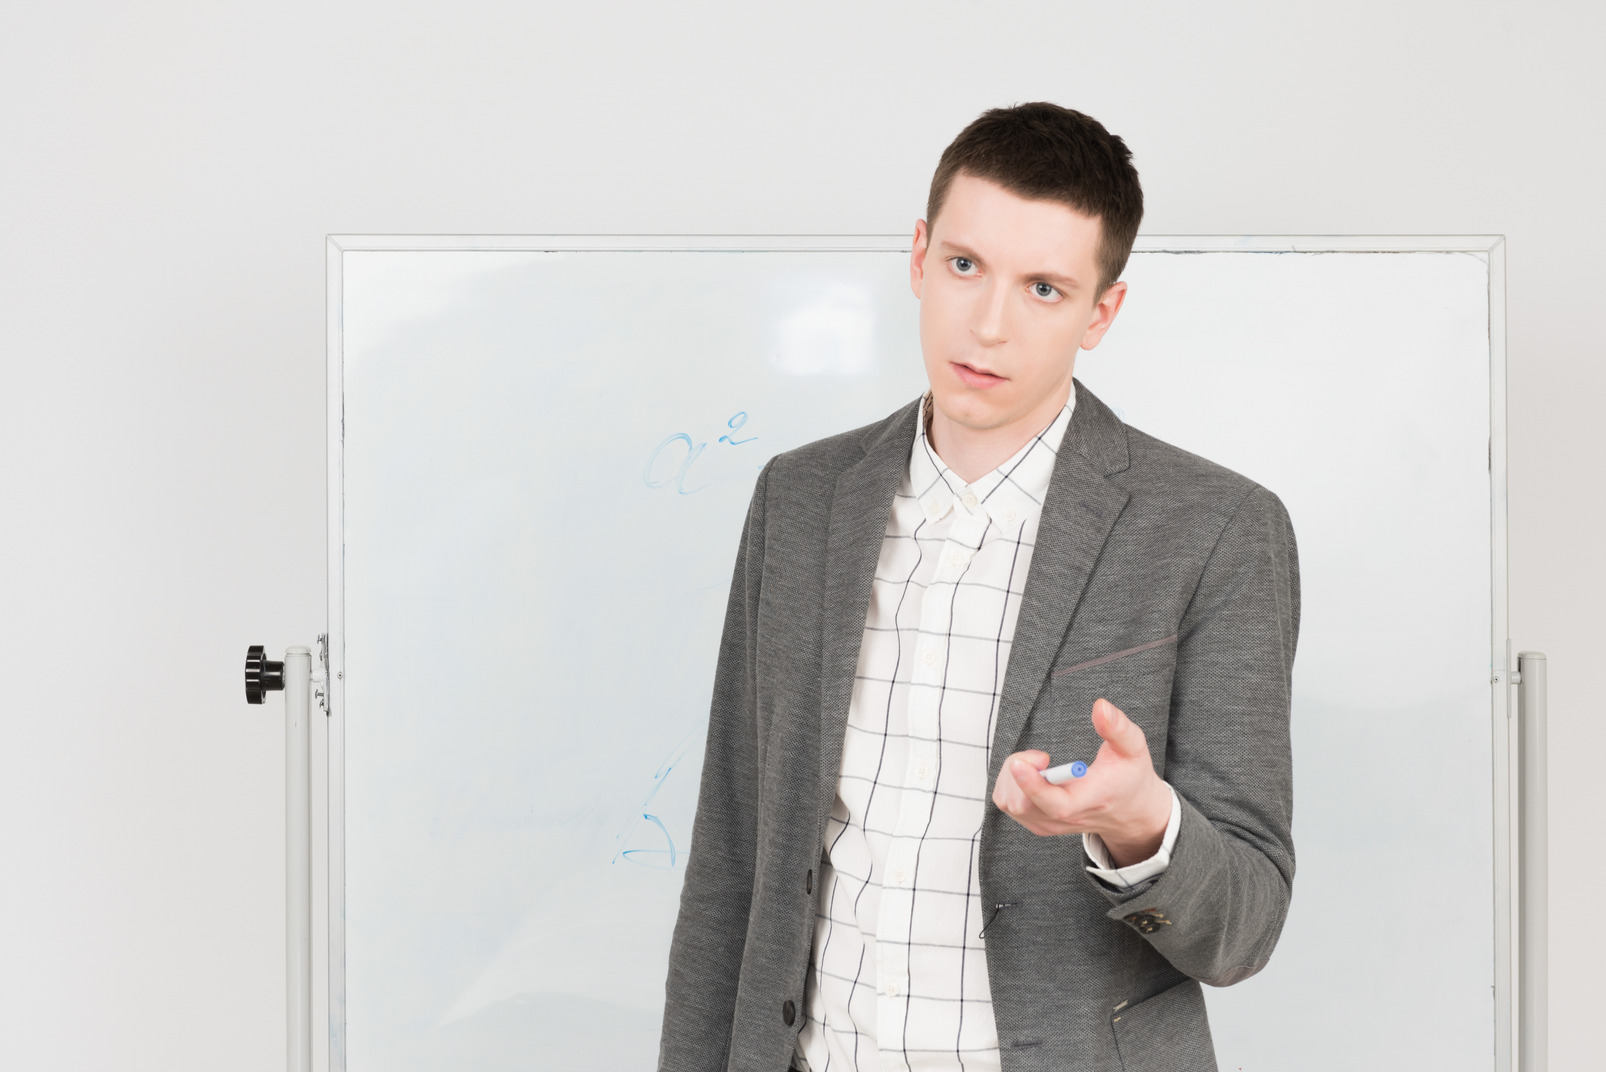 Young teacher standing at the whiteboard and pointing at something